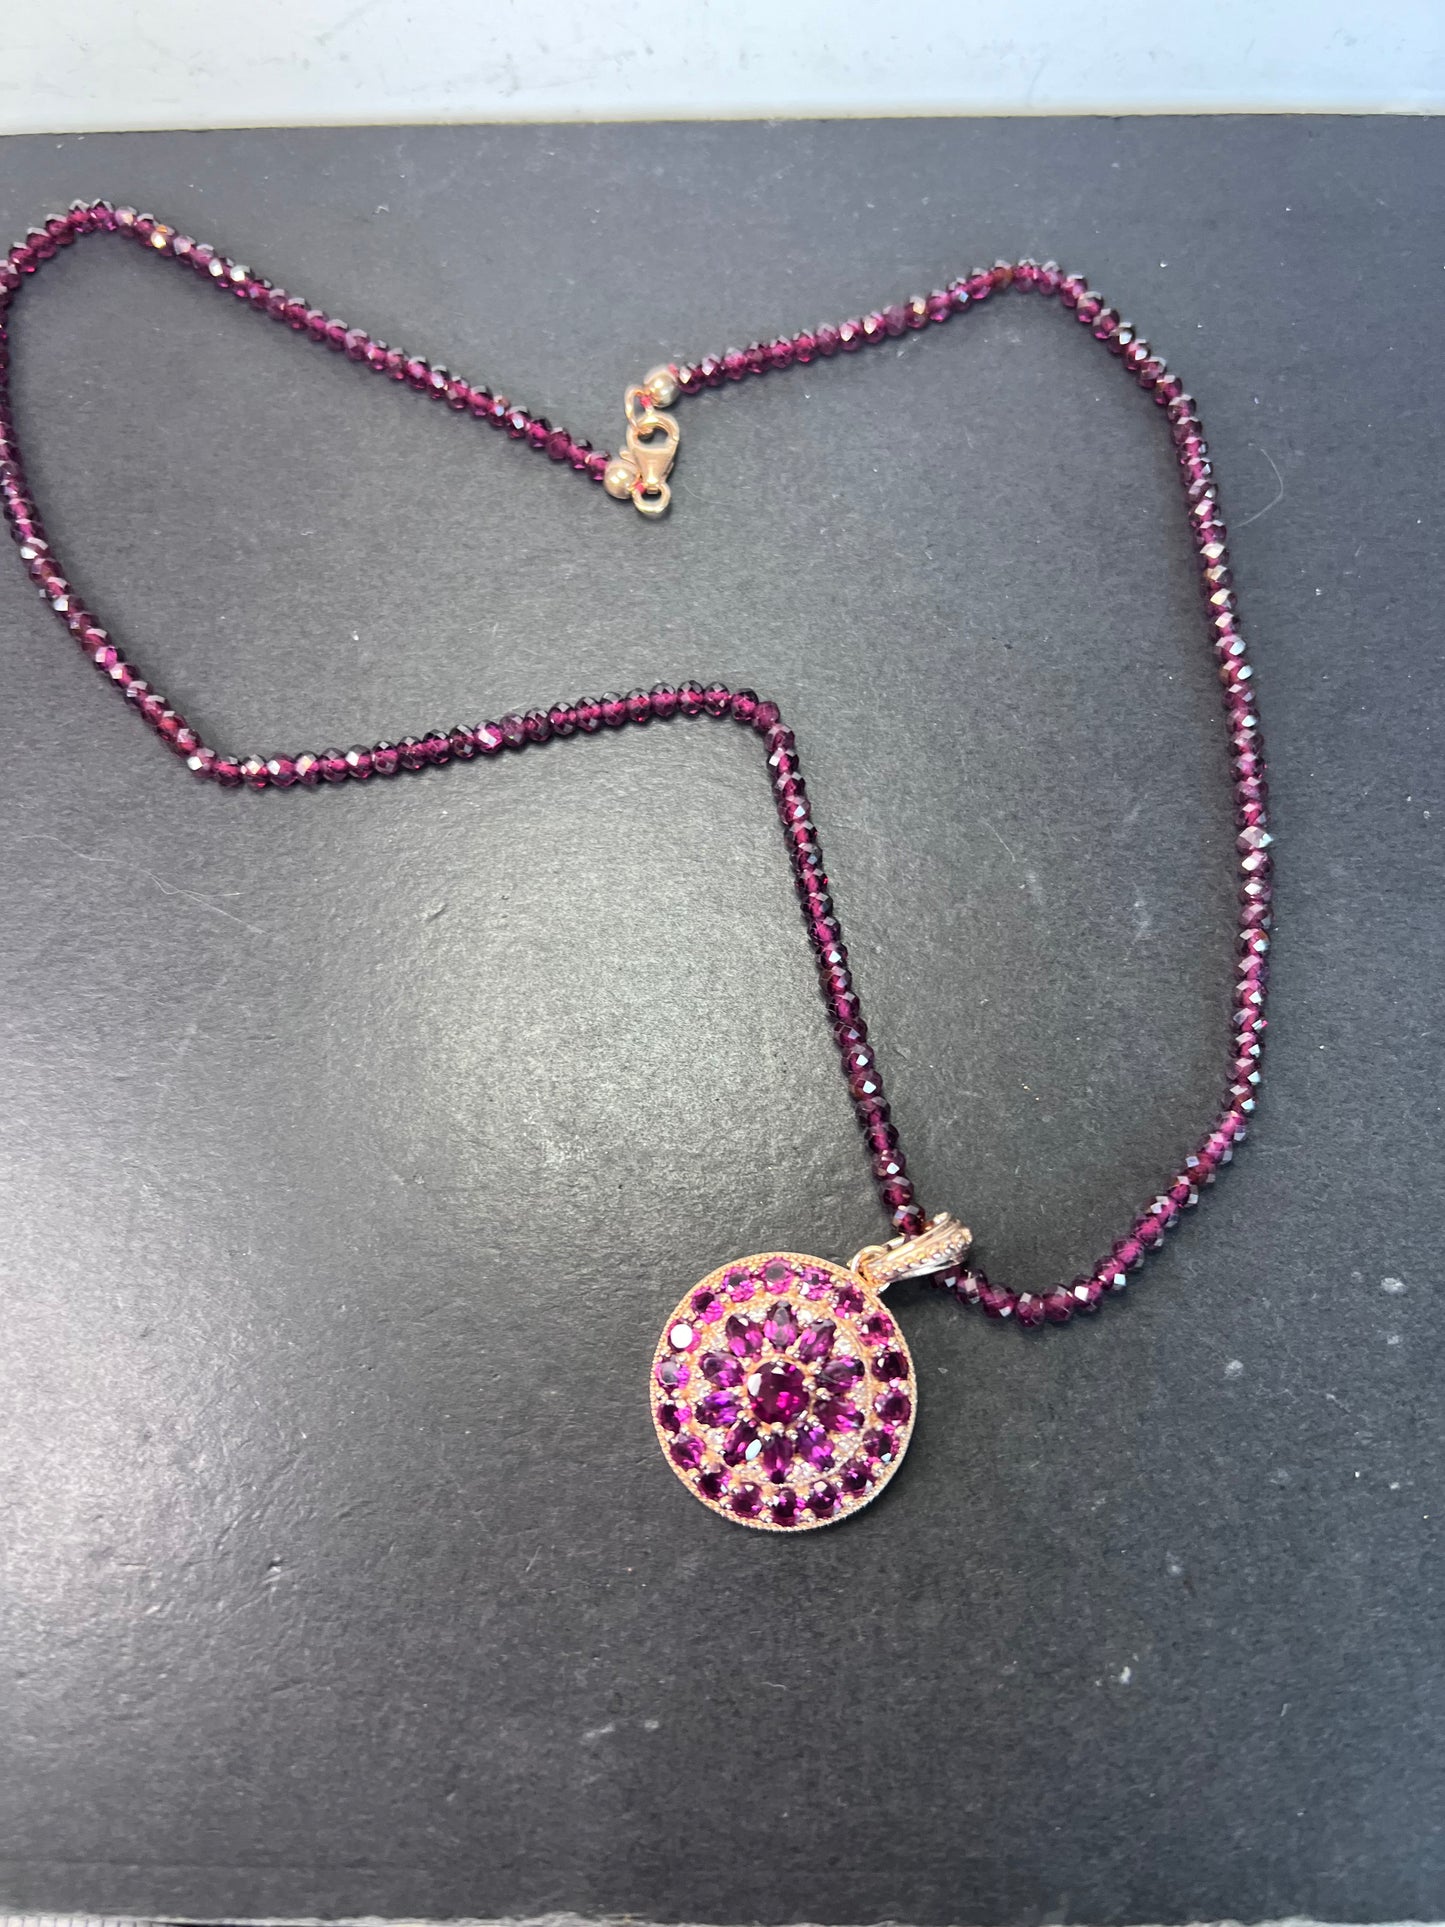 *NEW* Rhodolite garnet and white topaz pendant and necklace in rose gold over sterling silver